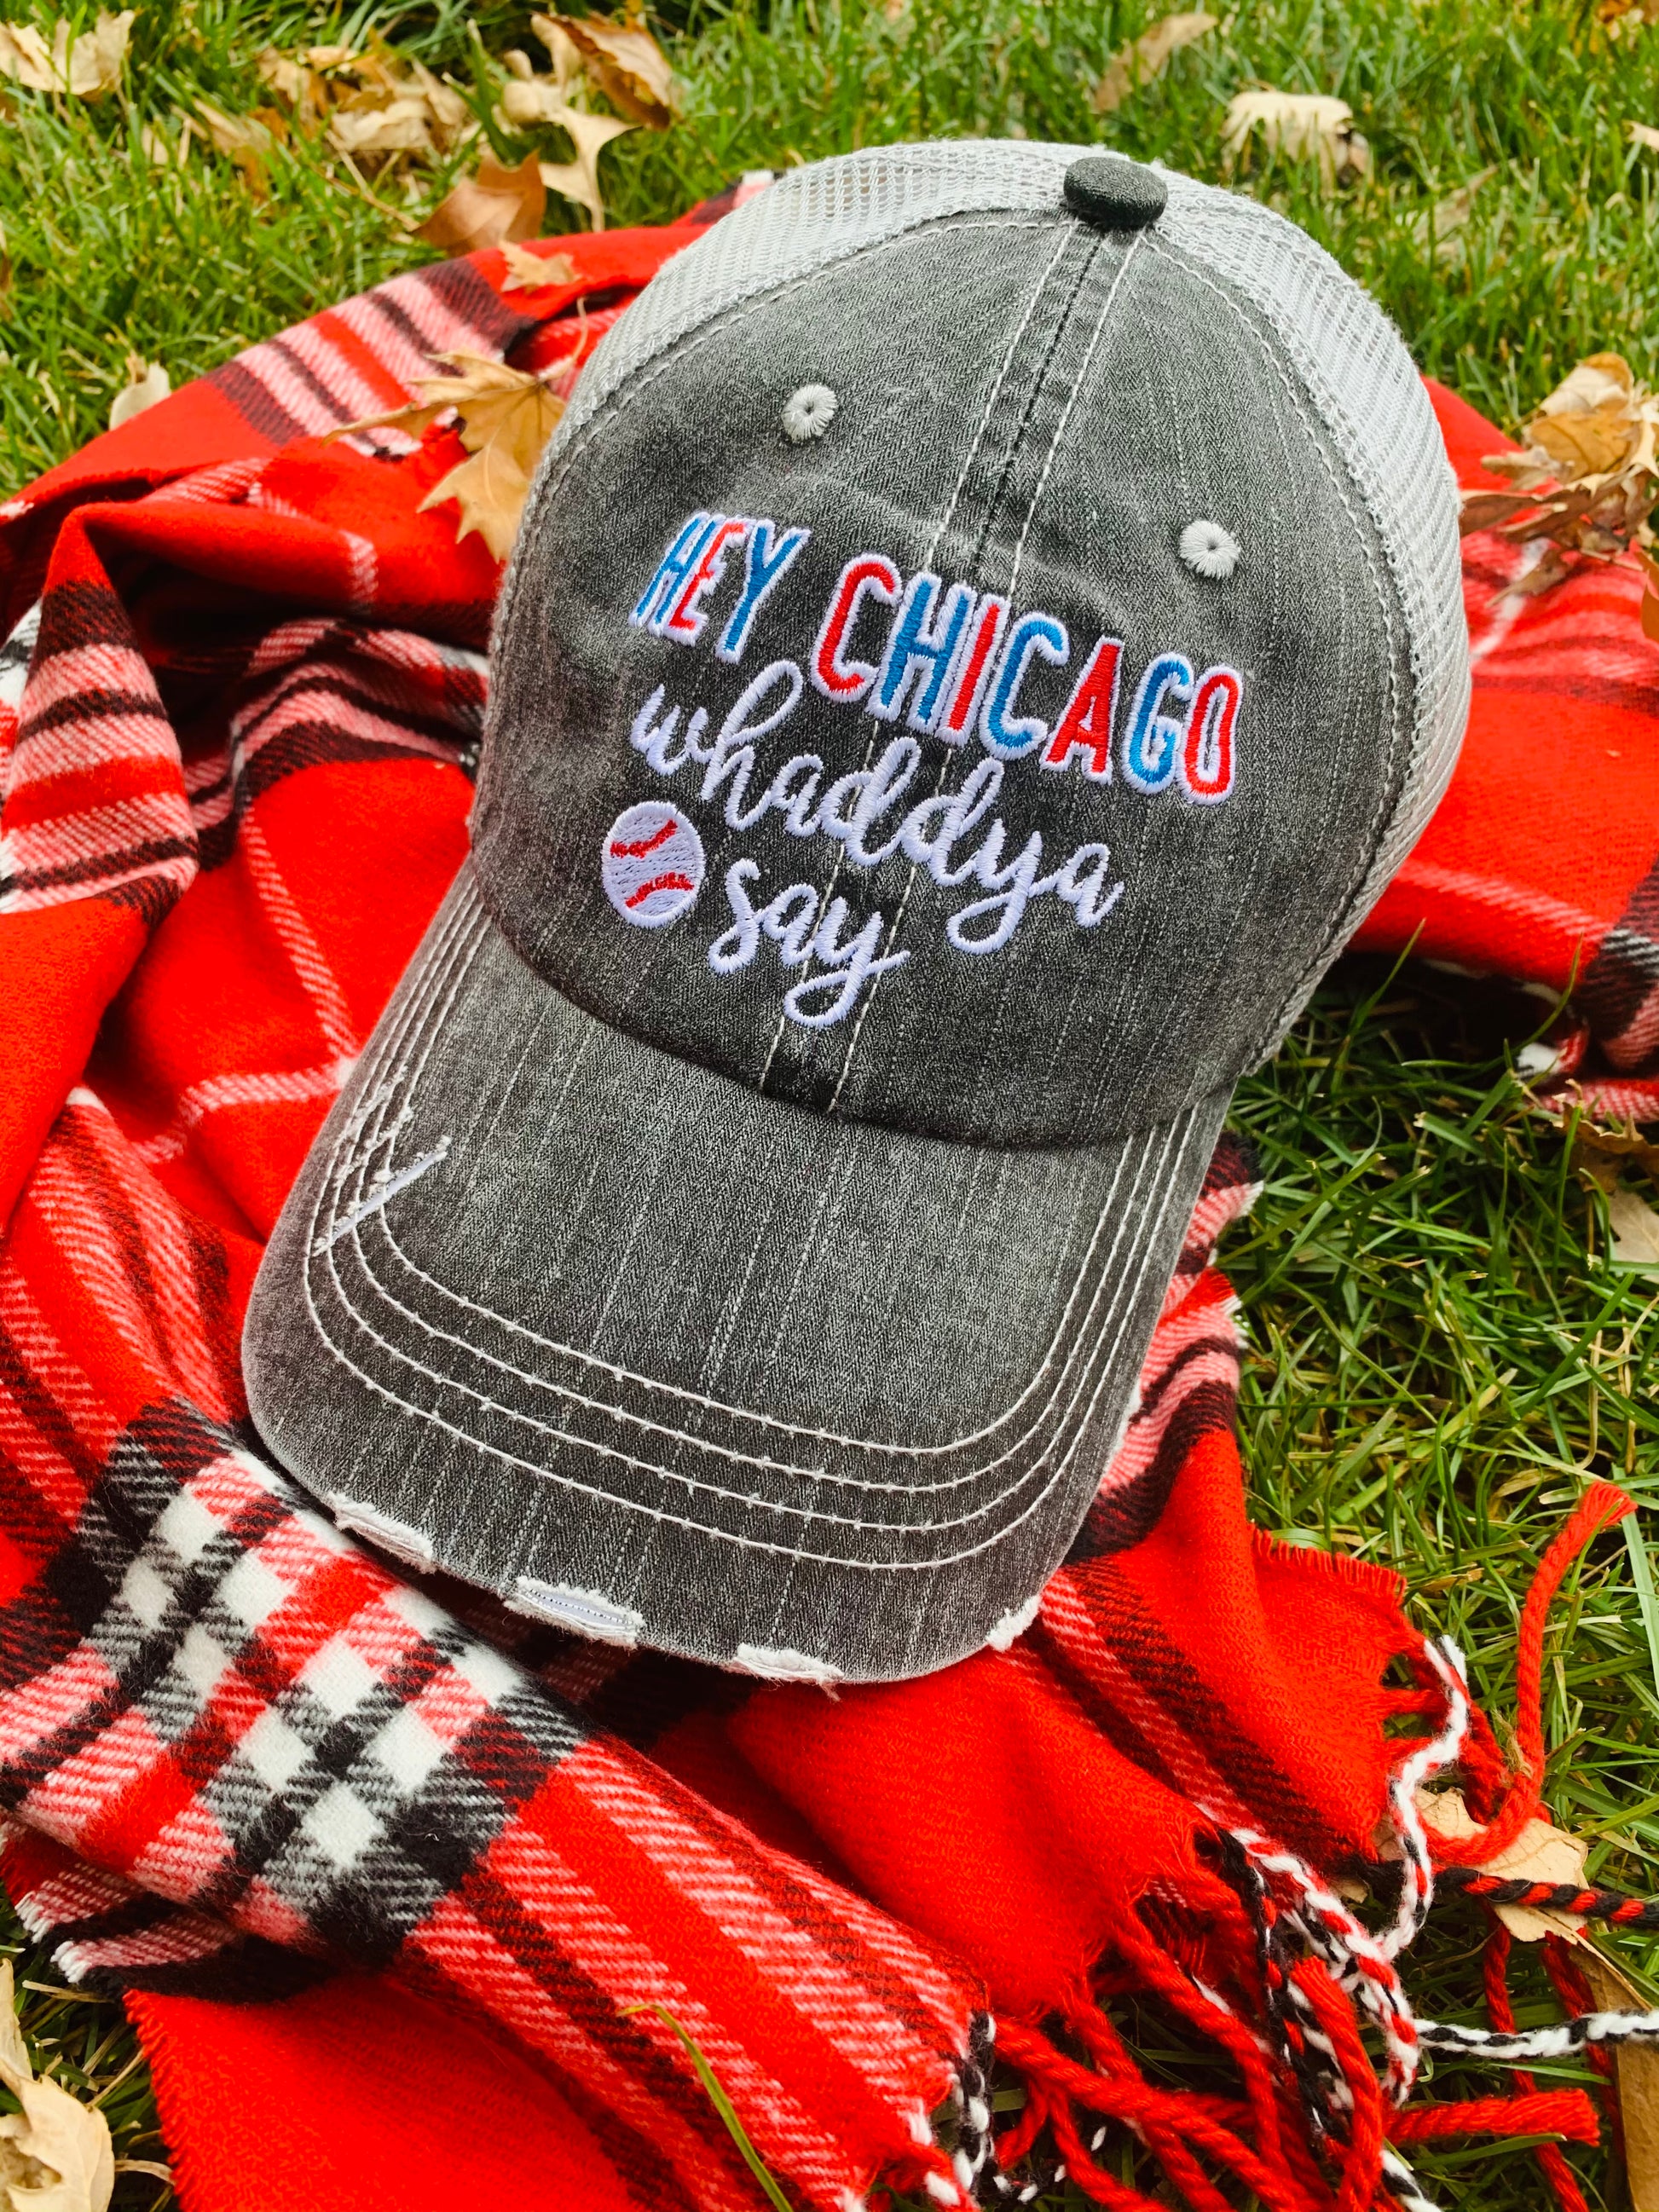 Baseball Hats Chicago Cubs Hey Chicago Whaddya Say Embroidered Distressed Gray Trucker Cap Unisex